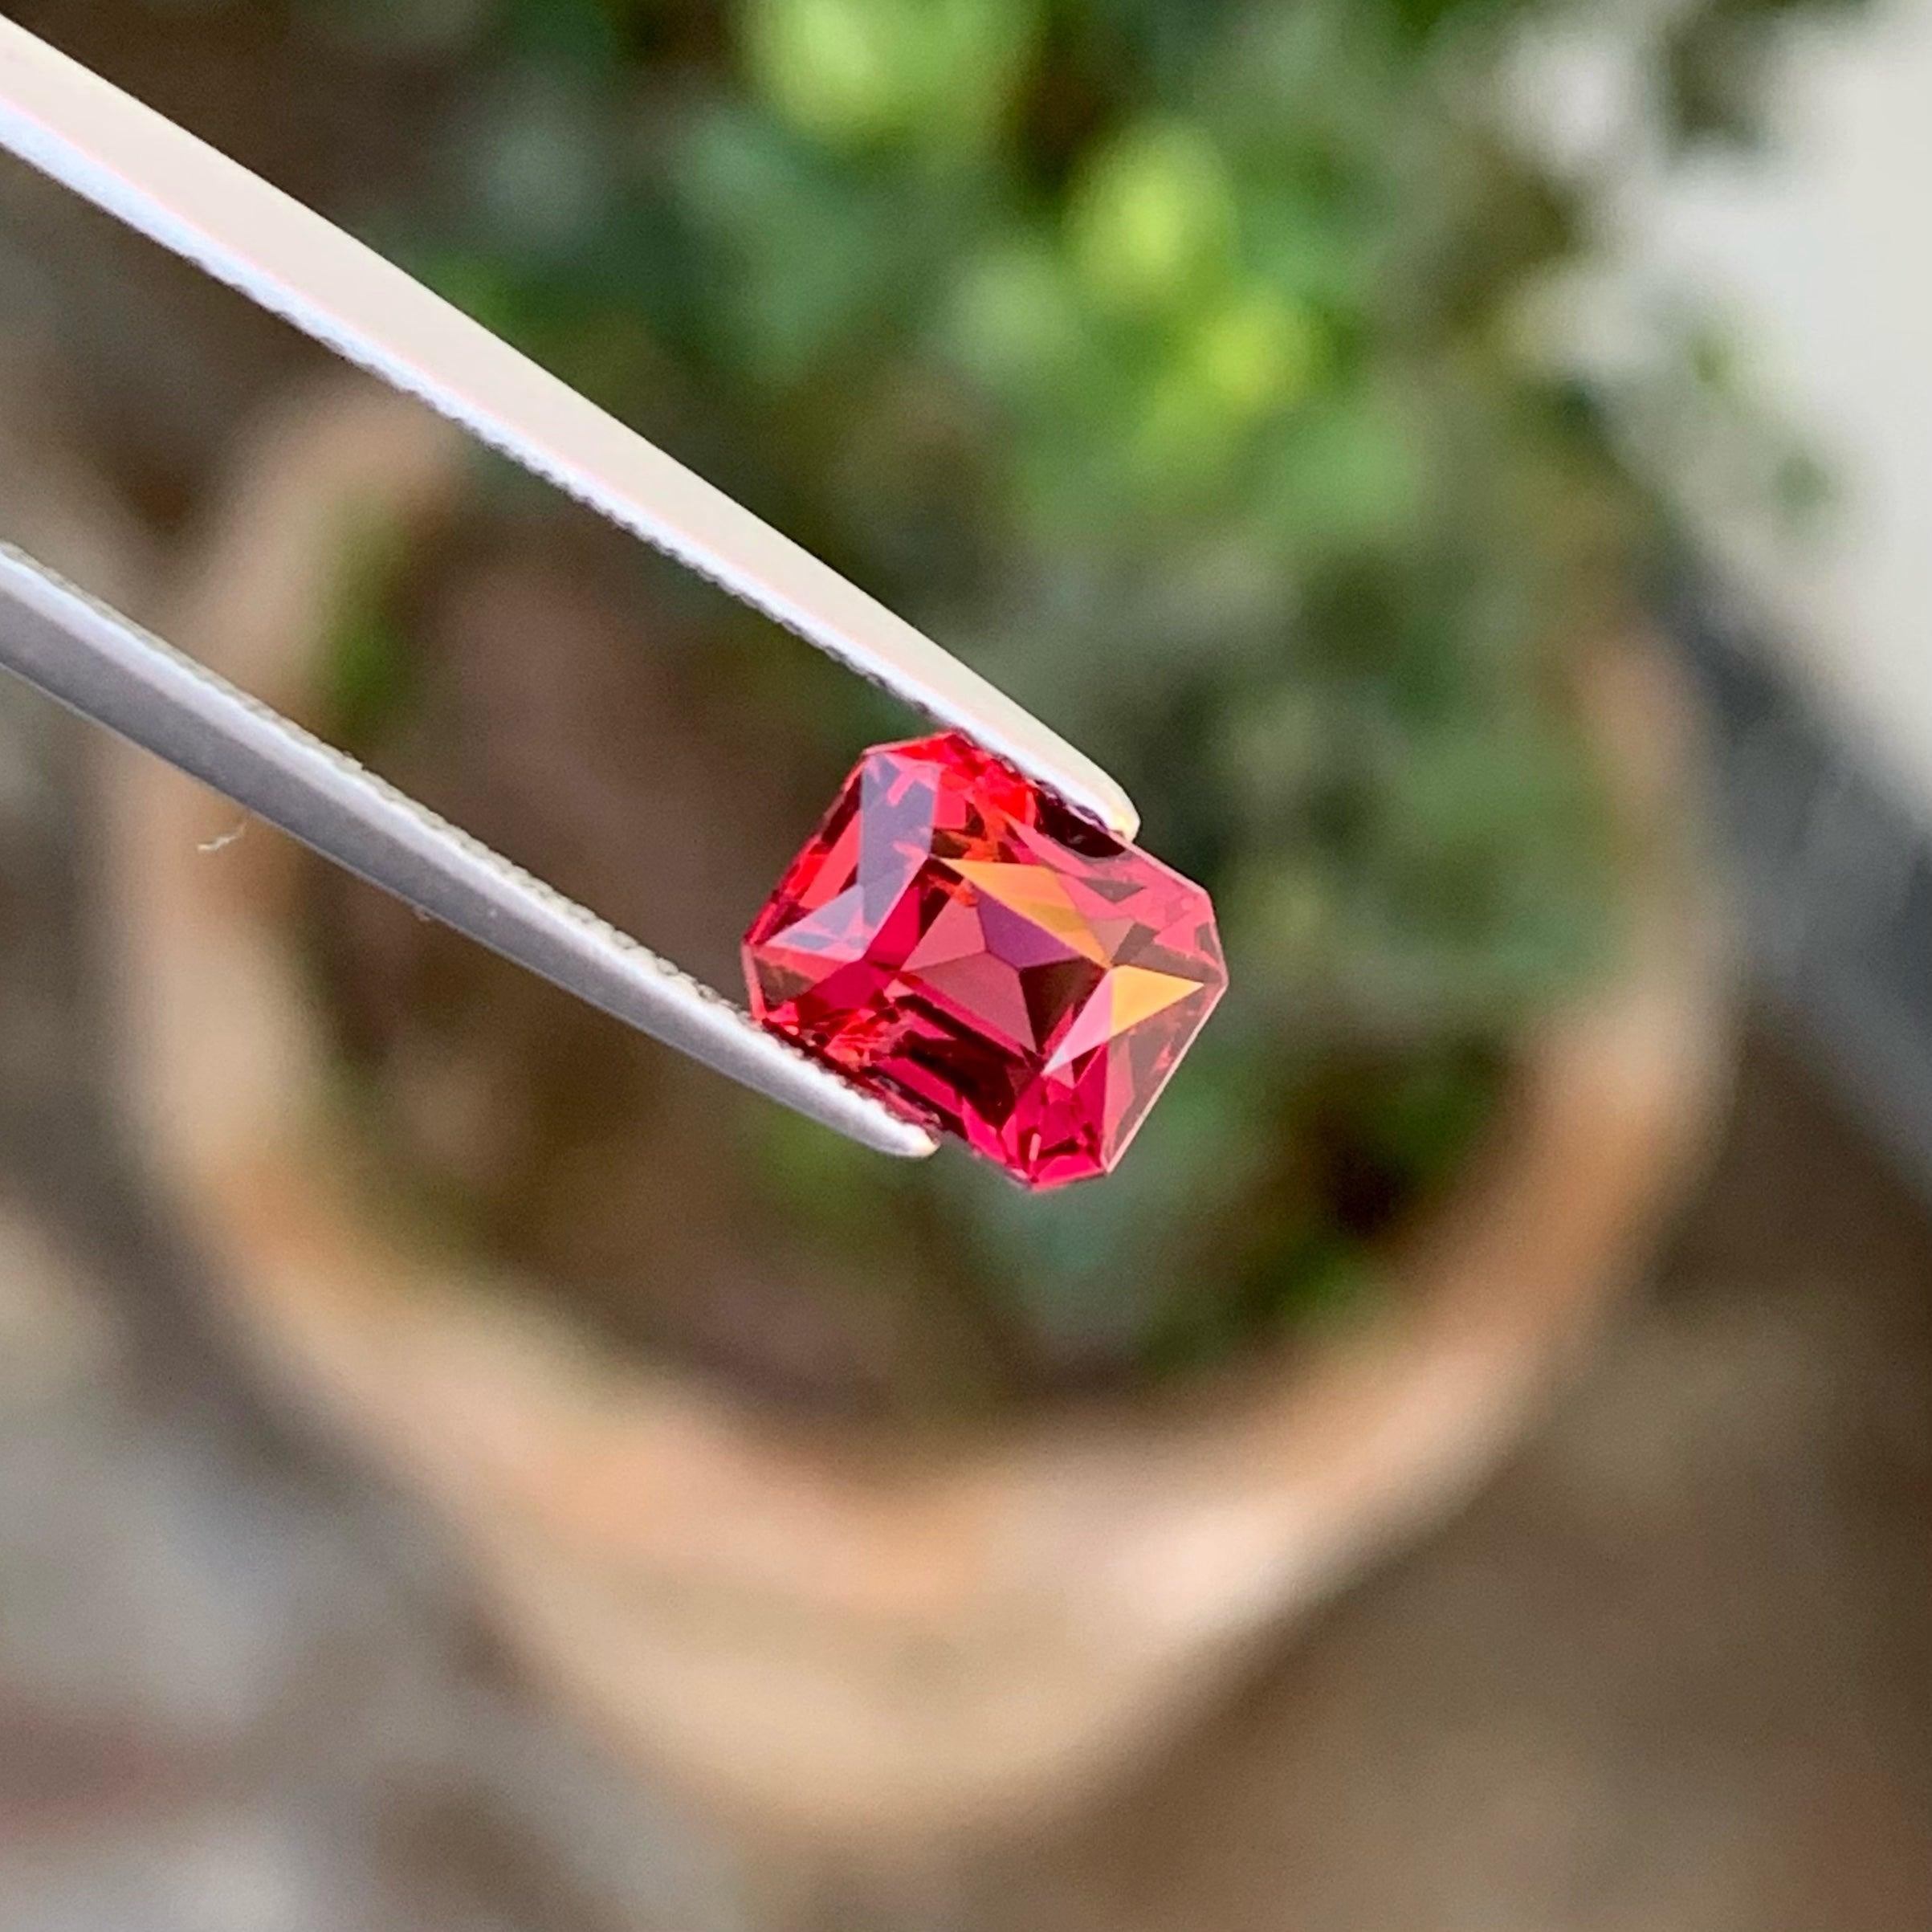 Precision Cut Malawi Loose Garnet Gem, Available for sale at whole sale price natural high quality 2.15 Carats SI Clean Clarity Natural Loose Garnet from Malawi.

Product Information:
GEMSTONE NAME: Precision Cut Malawi Loose Garnet Gem
WEIGHT:	2.15